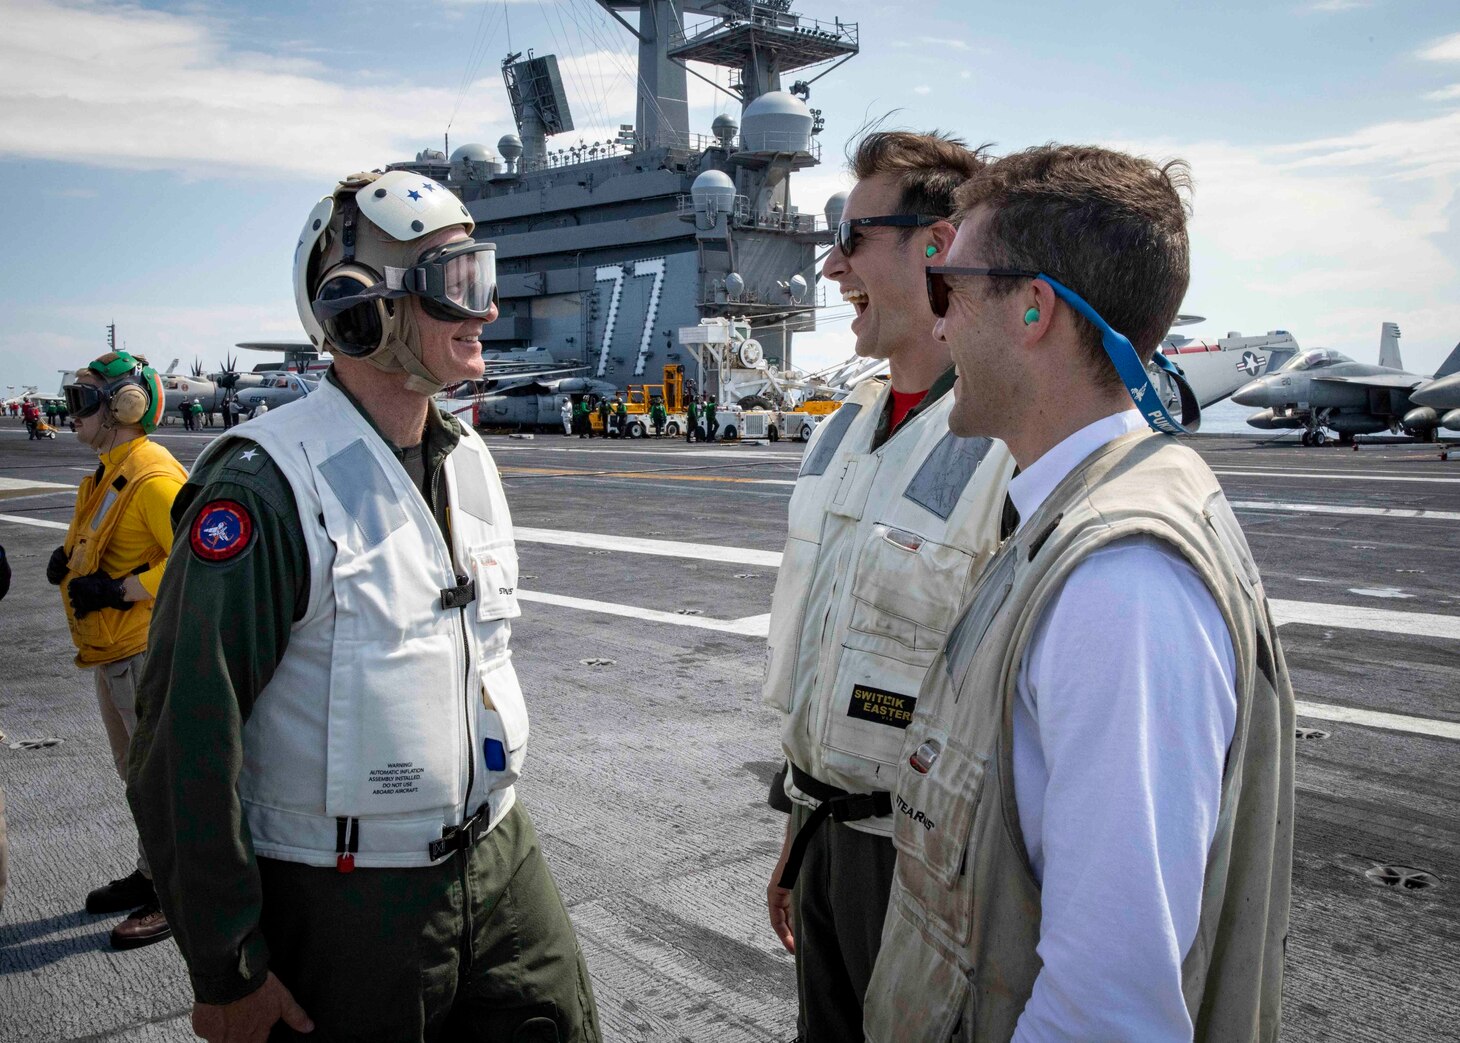 ATLANTIC OCEAN (June 9, 2022) Vice Adm. Daniel Dwyer, commander, U.S. 2nd Fleet and Joint Force Command Norfolk, meets with landing safety officers aboard the Nimitz-class aircraft carrier USS George H.W. Bush (CVN 77), June 9, 2022. The George H.W. Bush Carrier Strike Group (CSG) is underway completing a certification exercise to increase U.S. and allied interoperability and warfighting capability before a future deployment. The George H.W. Bush CSG is an integrated combat weapons system that delivers superior combat capability to deter, and if necessary, defeat America's adversaries in support of national security. Carrier Air Wing (CVW) 7 is the offensive air and strike component of CSG-10 and the George H.W. Bush CSG. (U.S. Navy photo by Mass Communication Specialist 3rd Class Brandon Roberson)